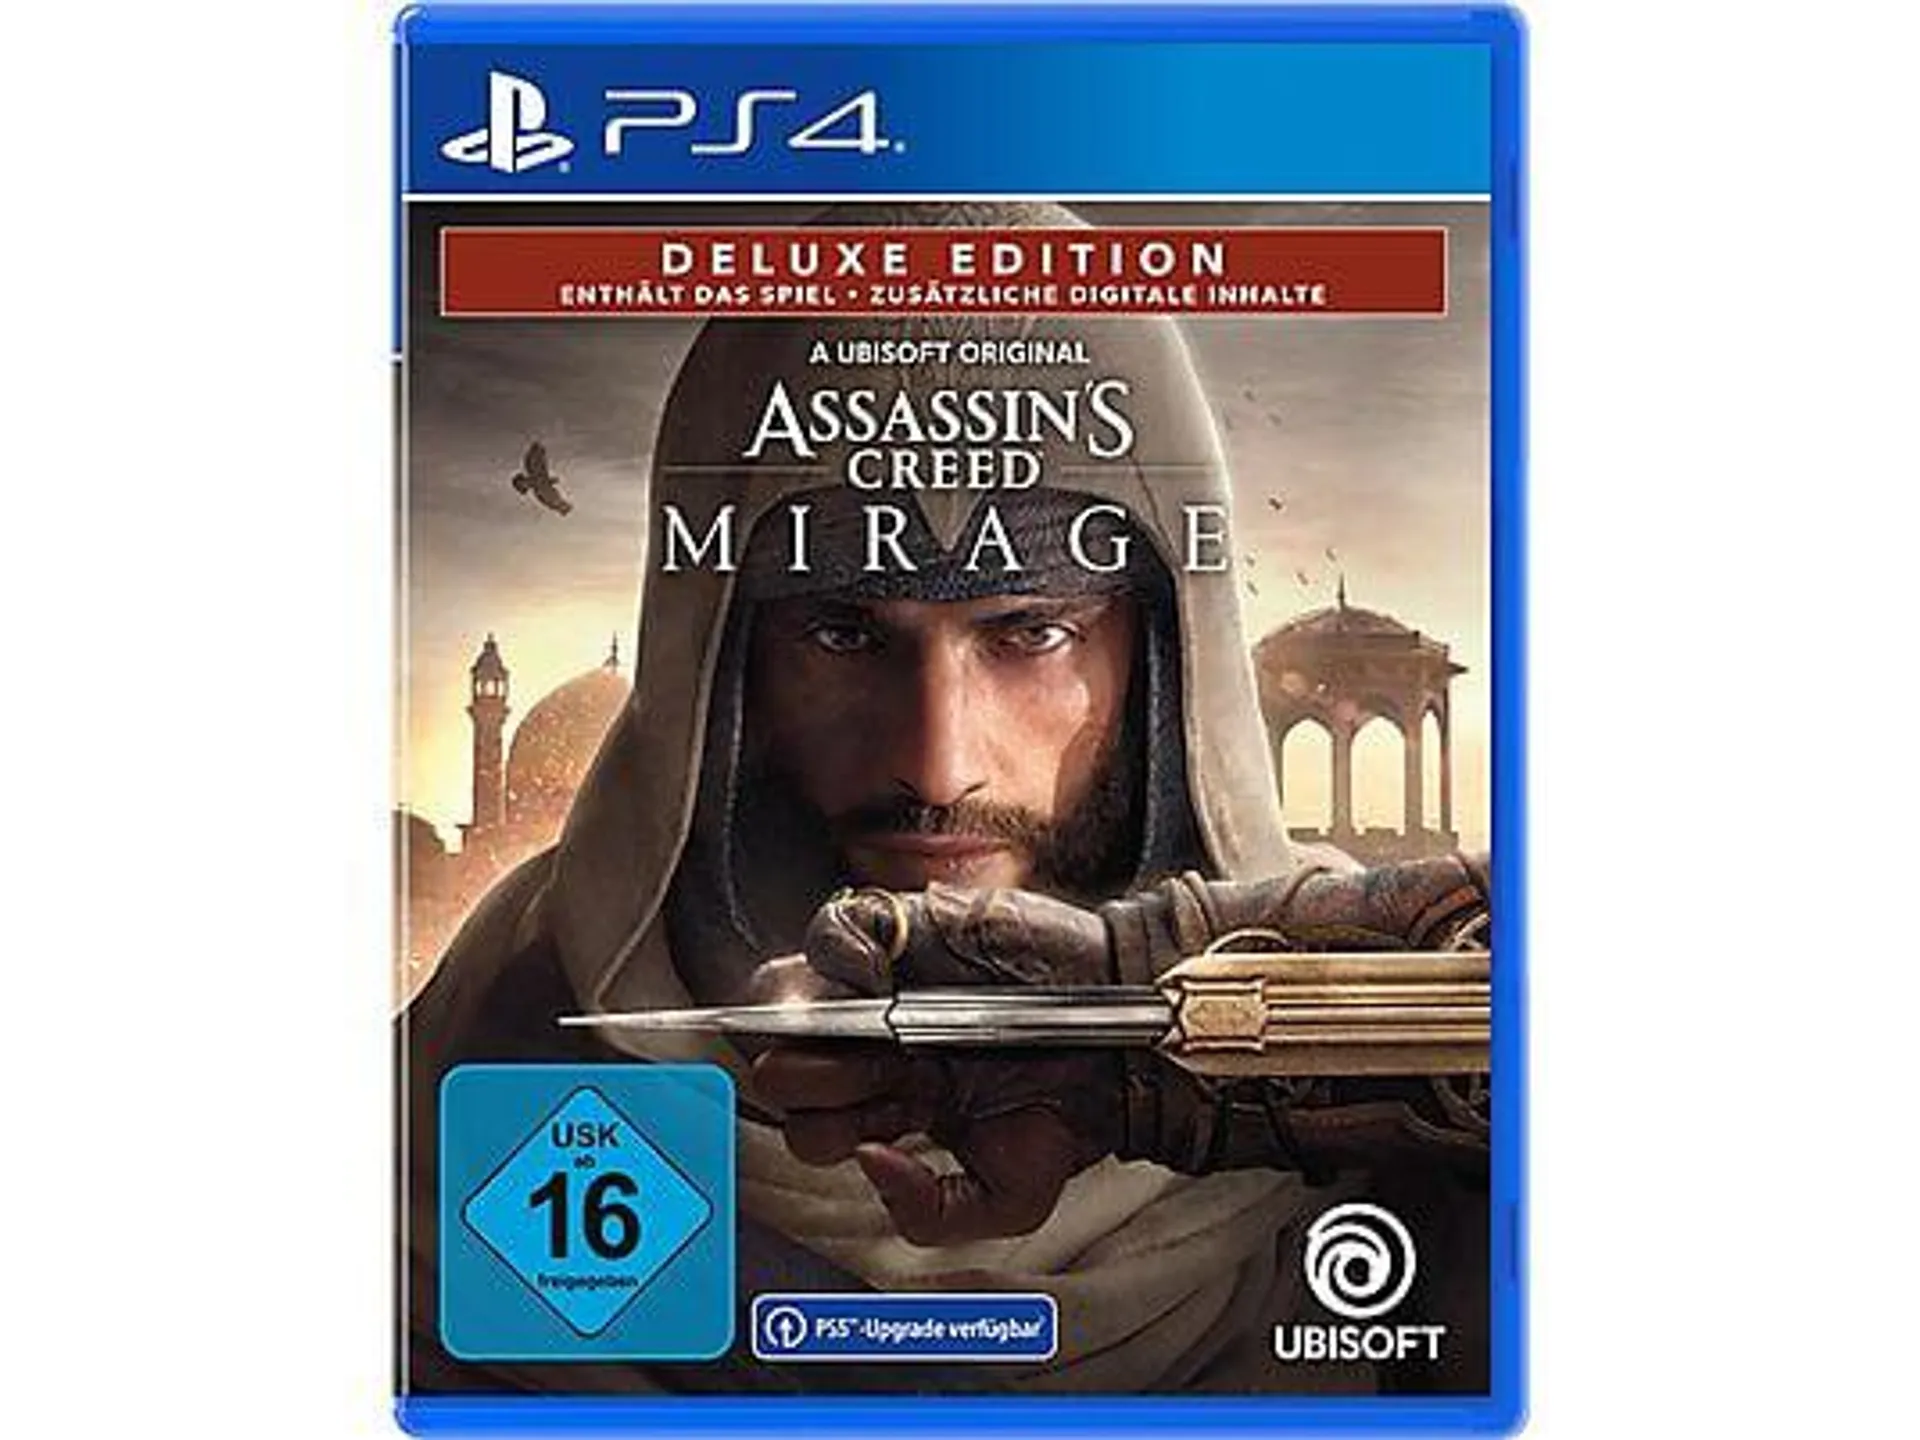 Assassin's Creed Mirage - Deluxe Edition - [PlayStation 4]